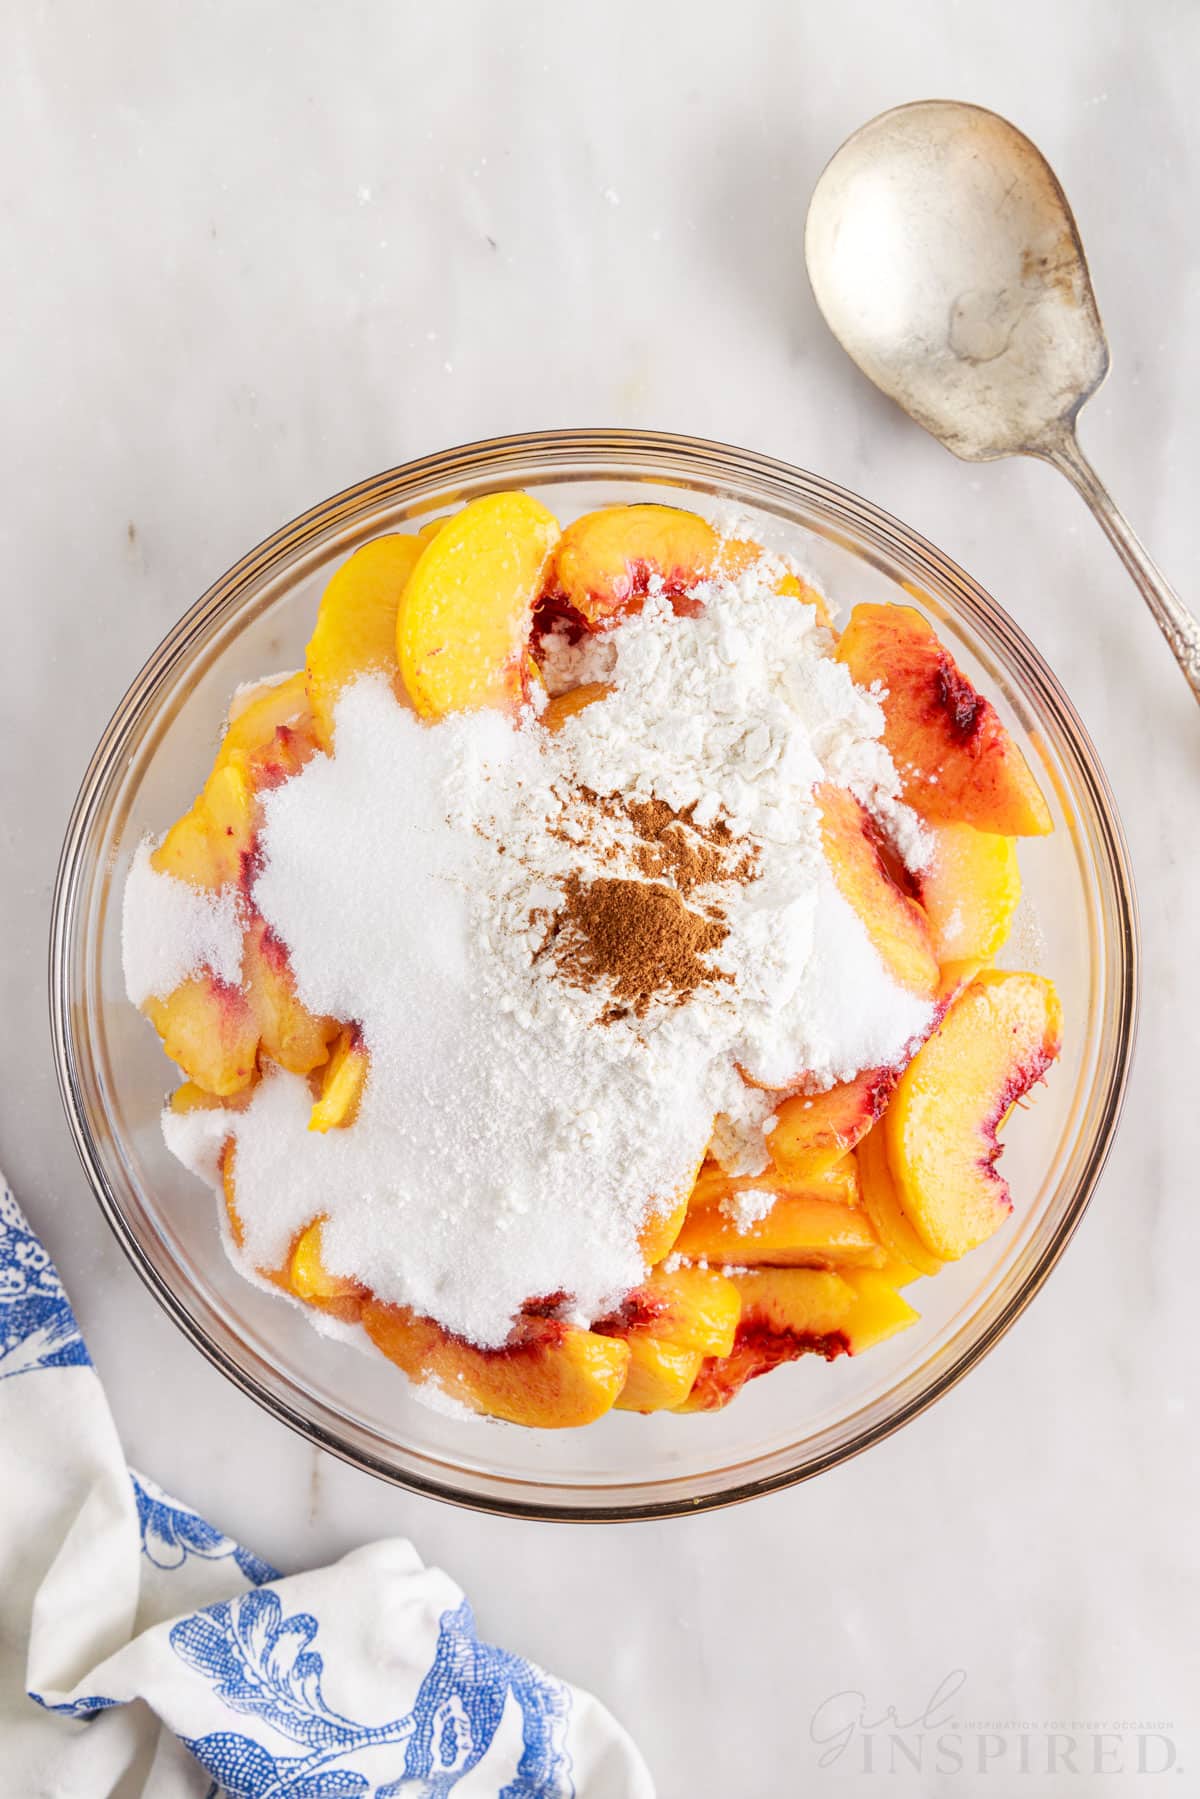 Flour and sugar added to sliced peaches.